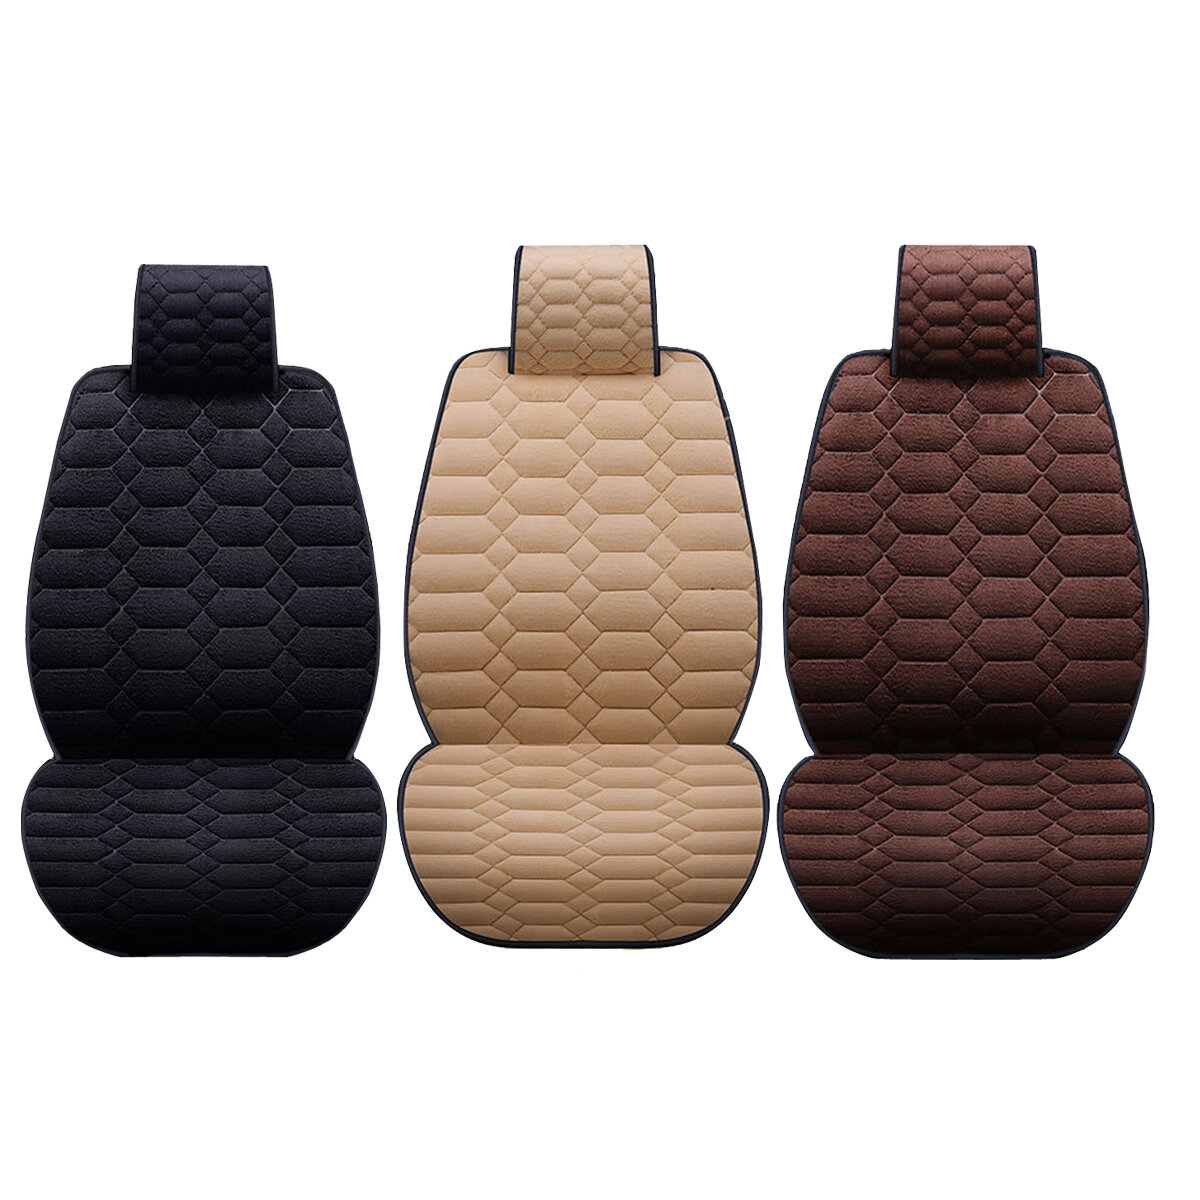 Car suv front row seat cover cushion chair breathable cover pad